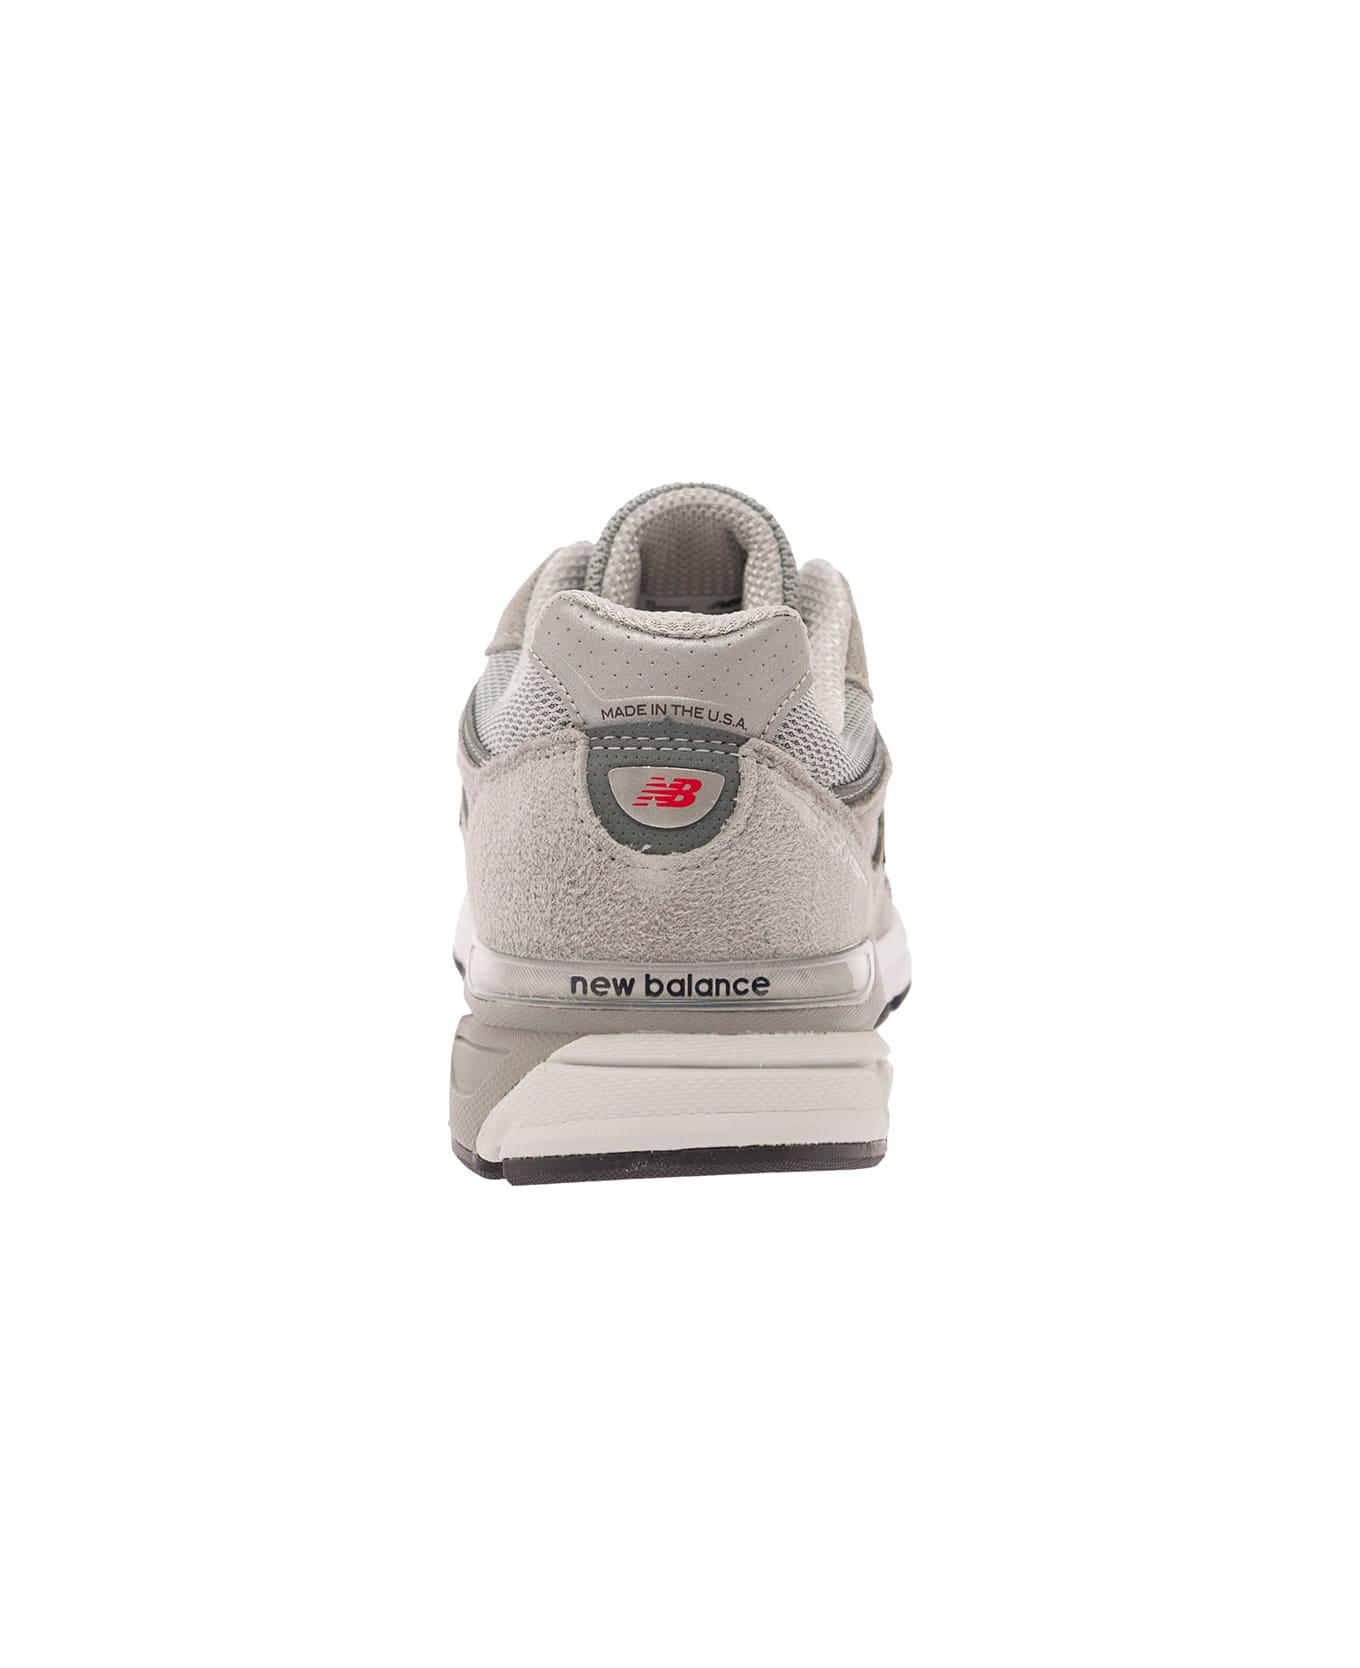 New Balance '990' Grey Low Top Sneakers With Logo Detail In Leather And Suede Woman - Grey